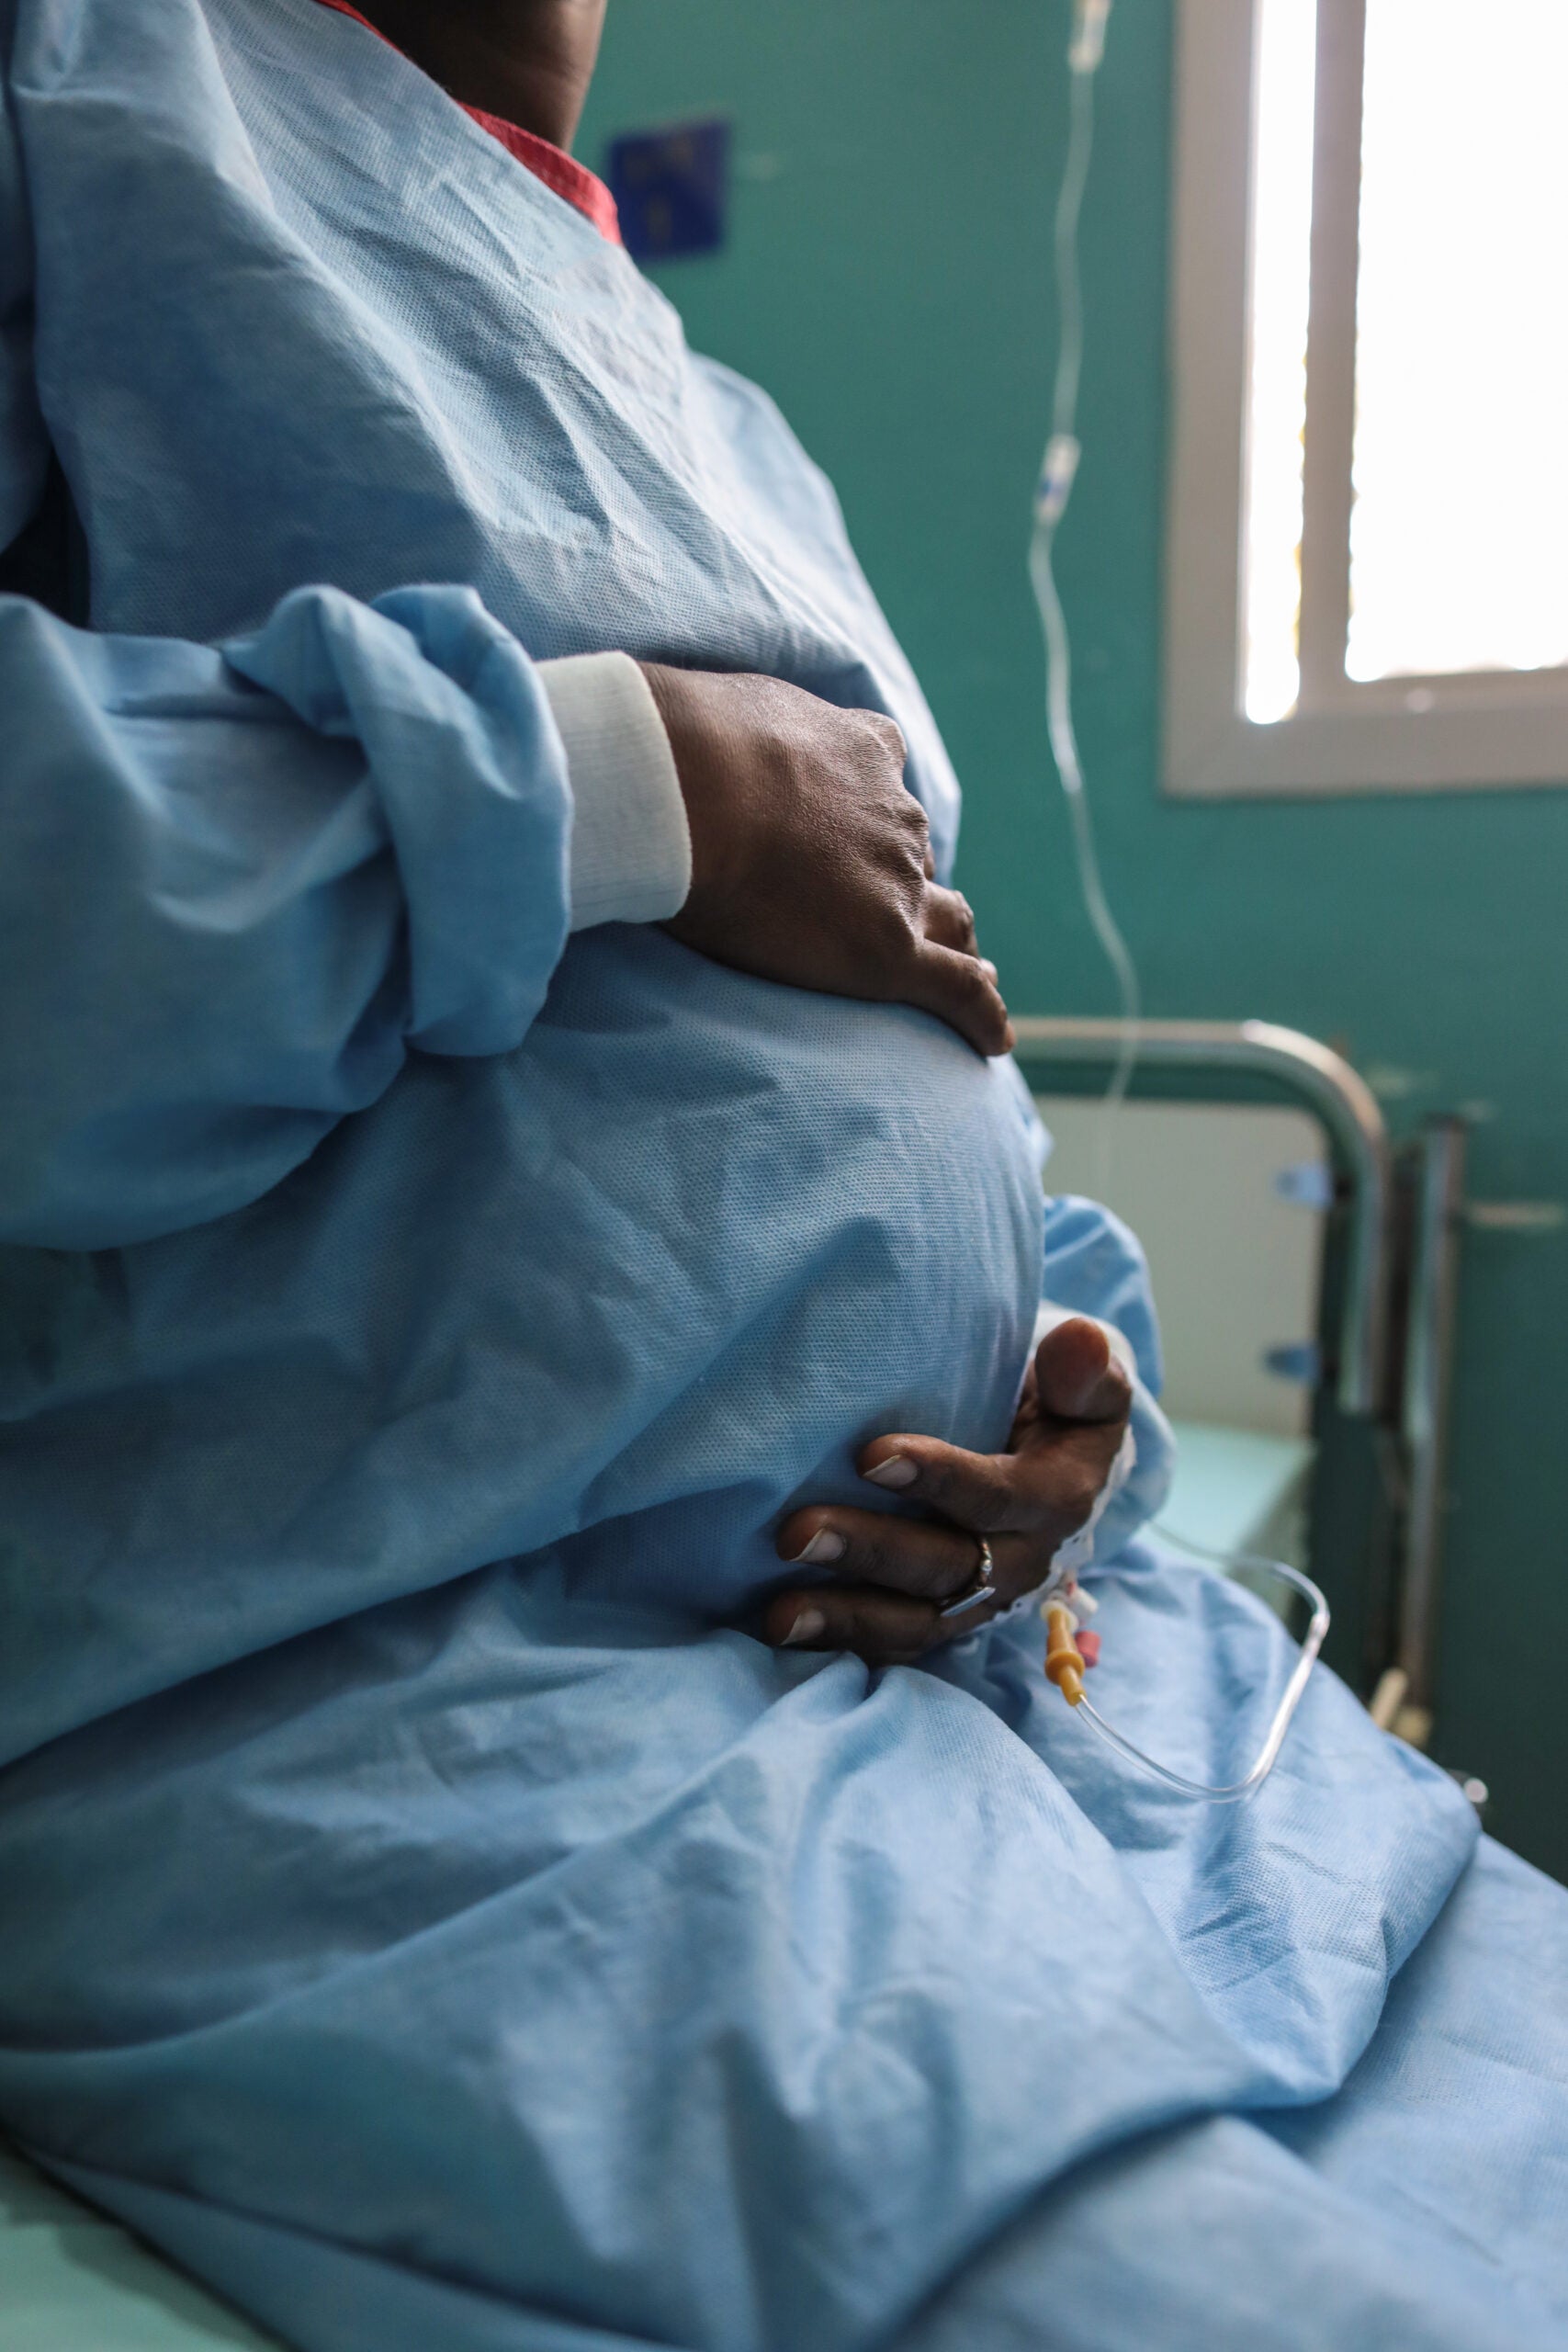 Veronique Sagna, holds her unborn child just prior to a cesearean section delivery due to a rare occurrence known as abdominal pregnancy, Feb. 8, 2018, at Hospital Militaire De Ouakam, Dakar, Senegal. Abdominal pregnancy is a rare form of ectopic pregnancy with very high chance of mortality for both the mother and the fetus. Sagna's delivery was performed by U.S. Army and Senegalese medical personnel during MEDRETE 18-1. MEDRETE is a combined effort between the Senegalese government, U.S. Army Africa, and the Vermont National Guard. MEDRETE 18-1 is the first in a series of medical readiness training exercises that U.S. Army Africa is scheduled to facilitate within various countries in Africa, and serves as an opportunity for the partnered militaries to hone and strengthen their general surgery and trauma skills while reinforcing the partnership between the countries. The mutually beneficial exercise brings together Senegalese military and U.S. Army medical professionals to foster cooperation while conducting medical specific tasks. (U.S. Army photo by Sgt. Micah Merrill)